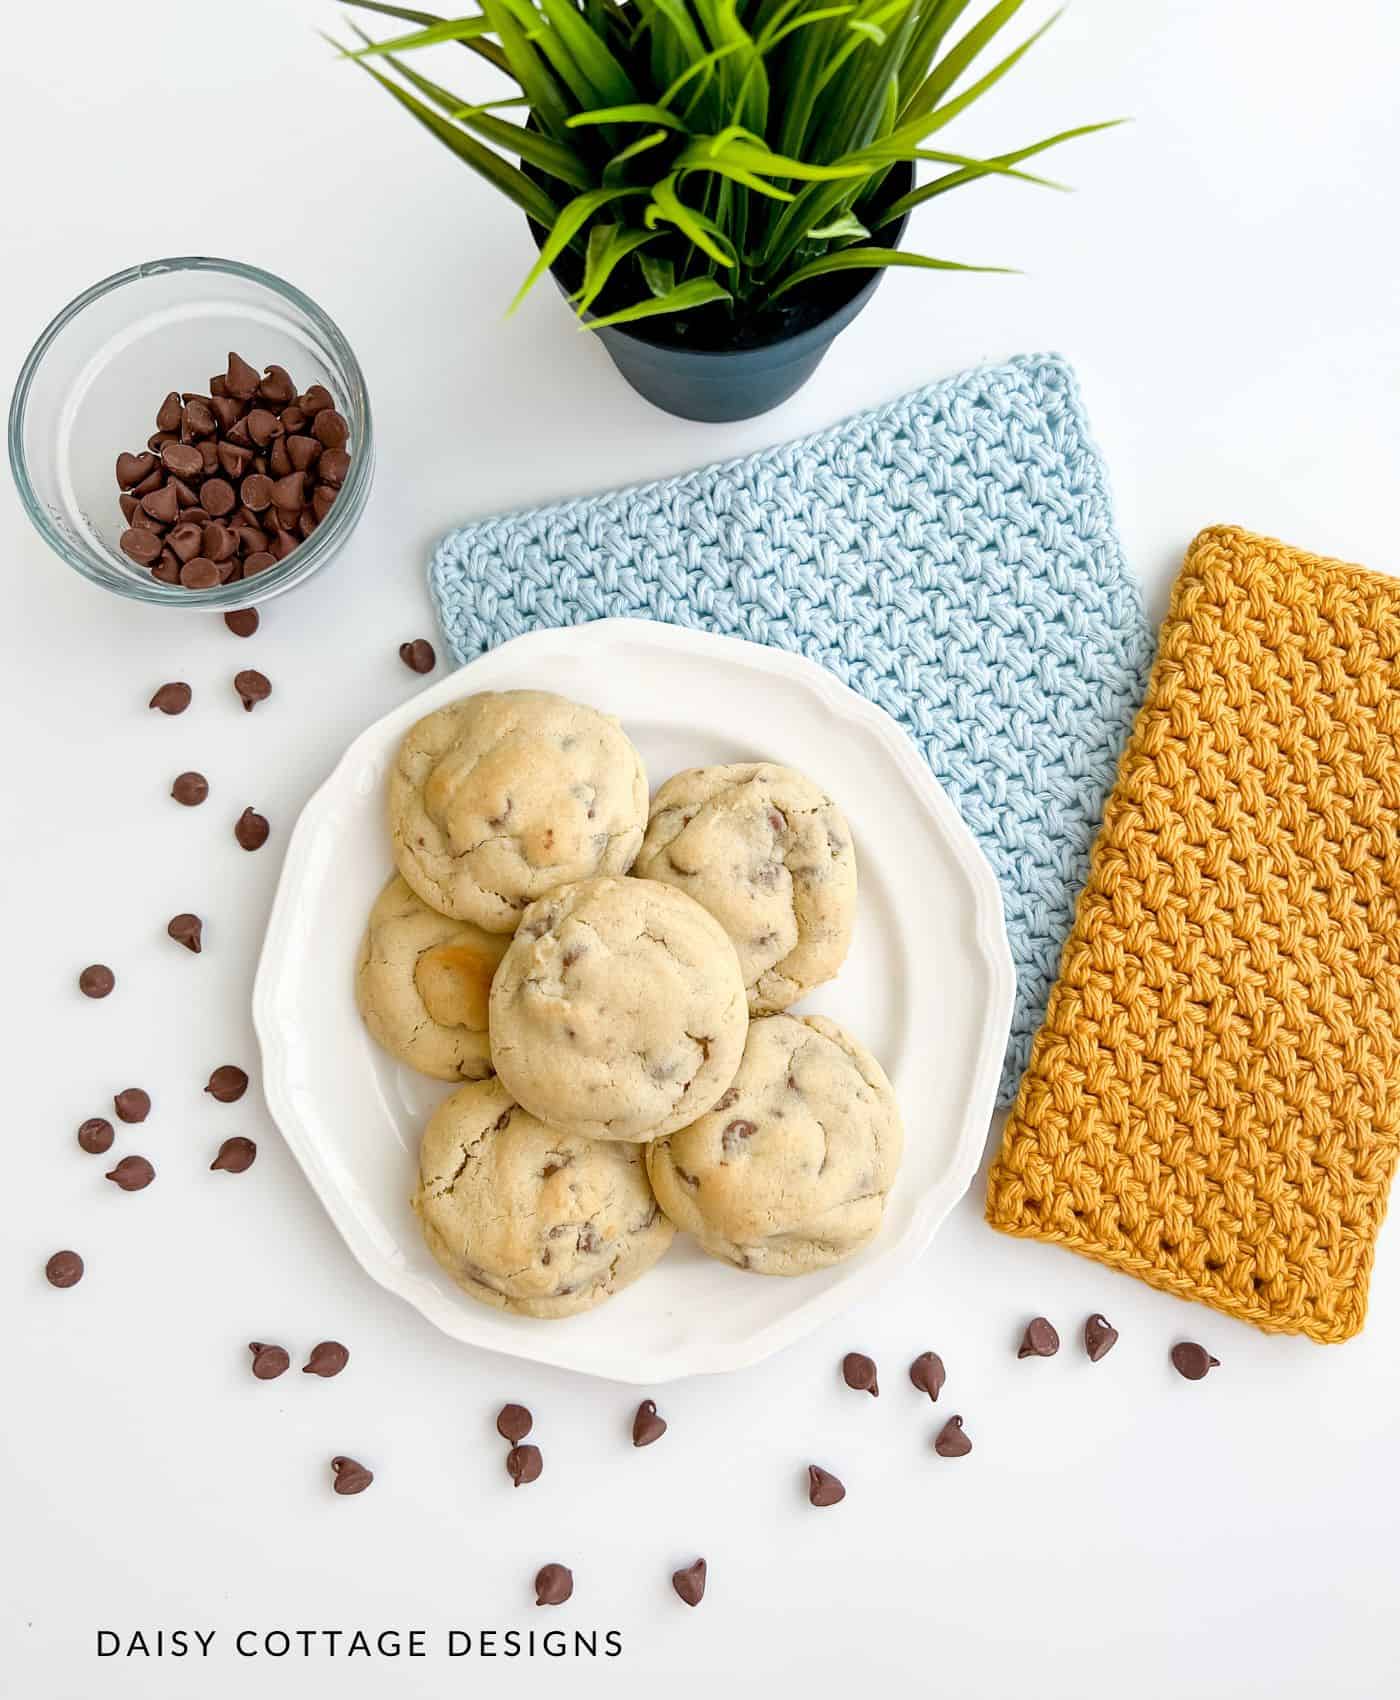 Crochet dishcloths with chocolate chip cookies